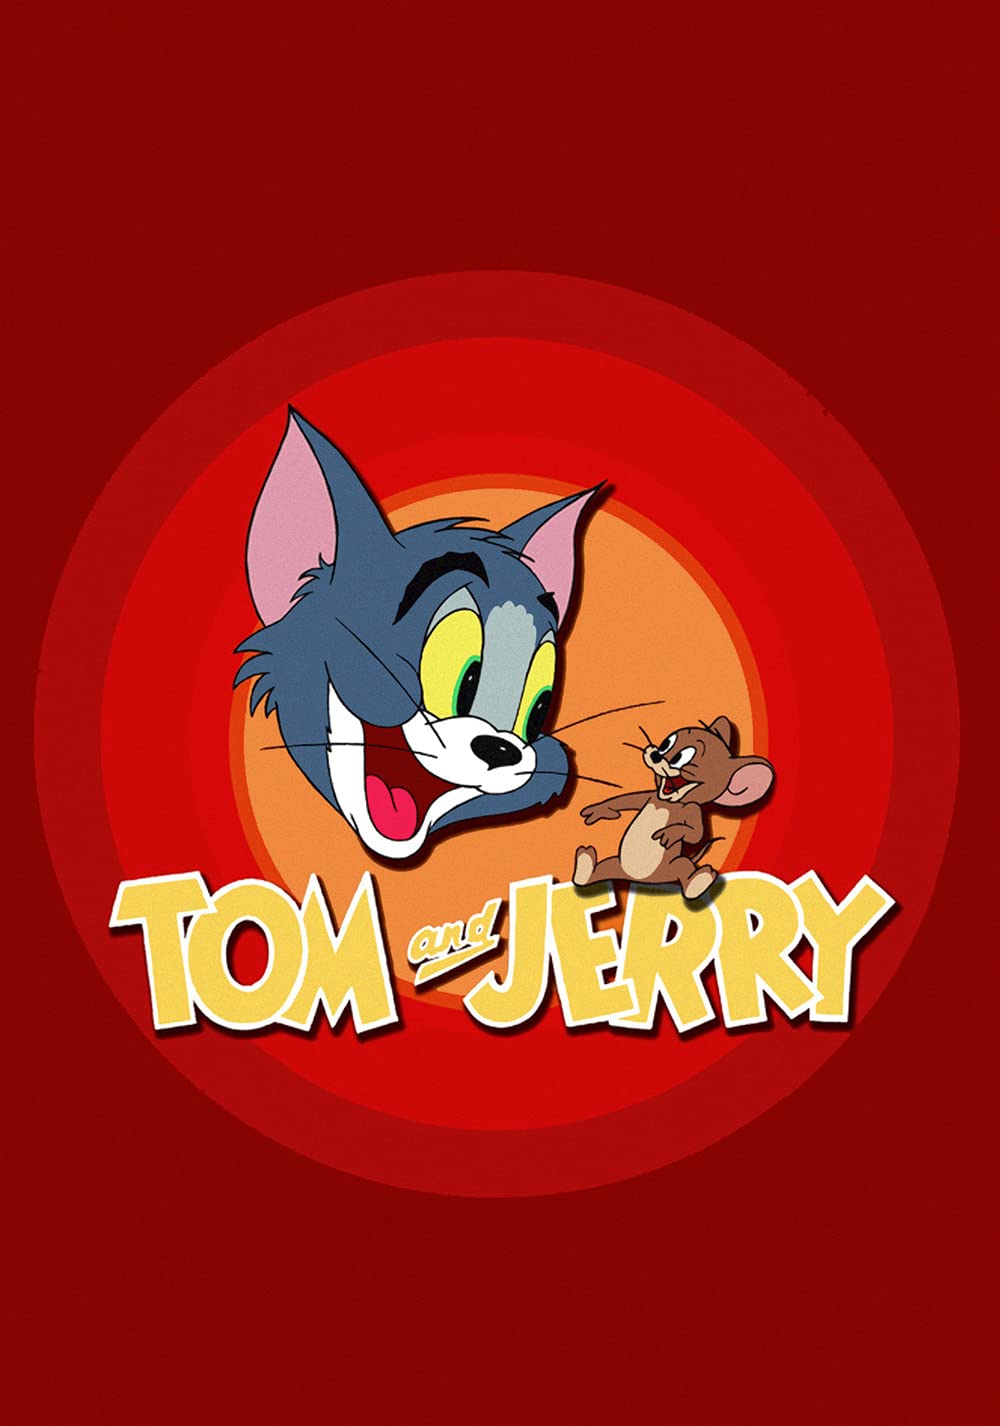 Tom-and-Jerry-Best-Old-Hindi-Dubbed-Cartoons-That-We-All-Love - Pop  Culture, Entertainment, Humor, Travel & More